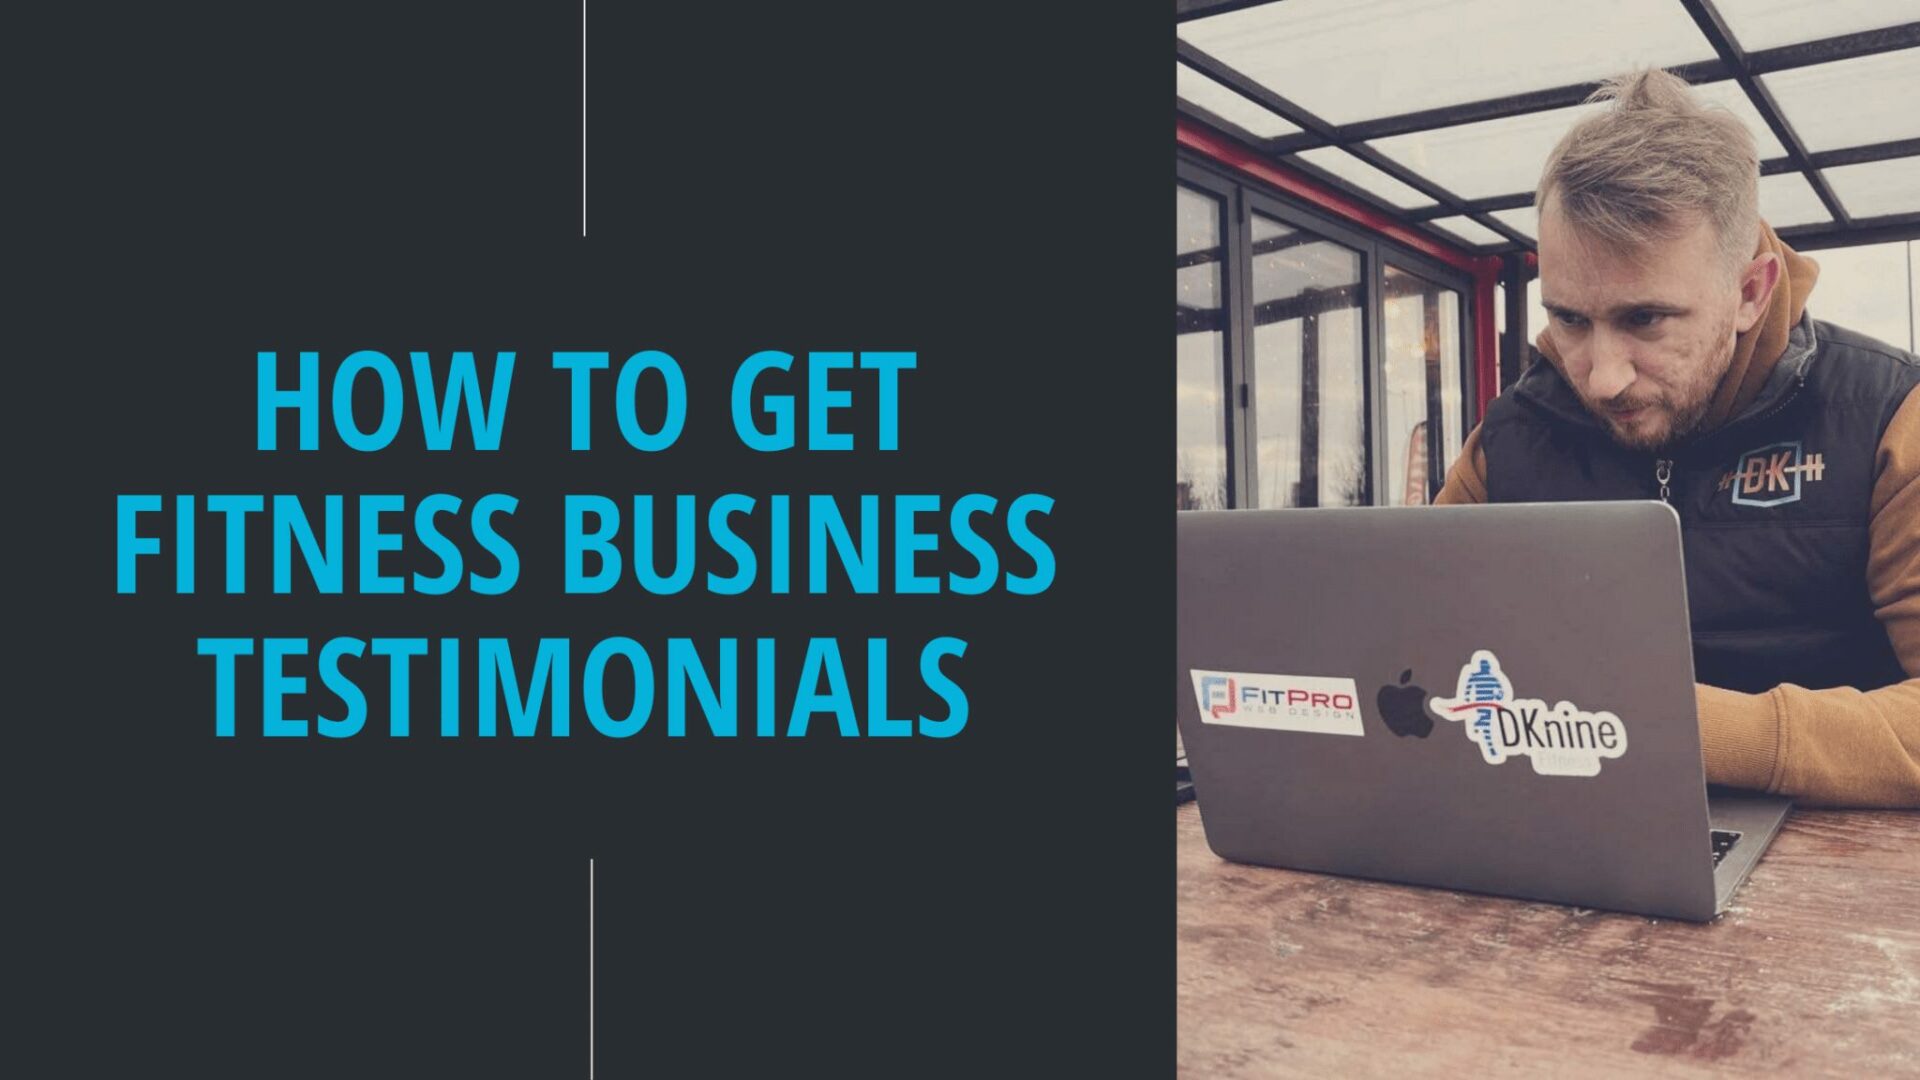 How to get fitness business testimonials